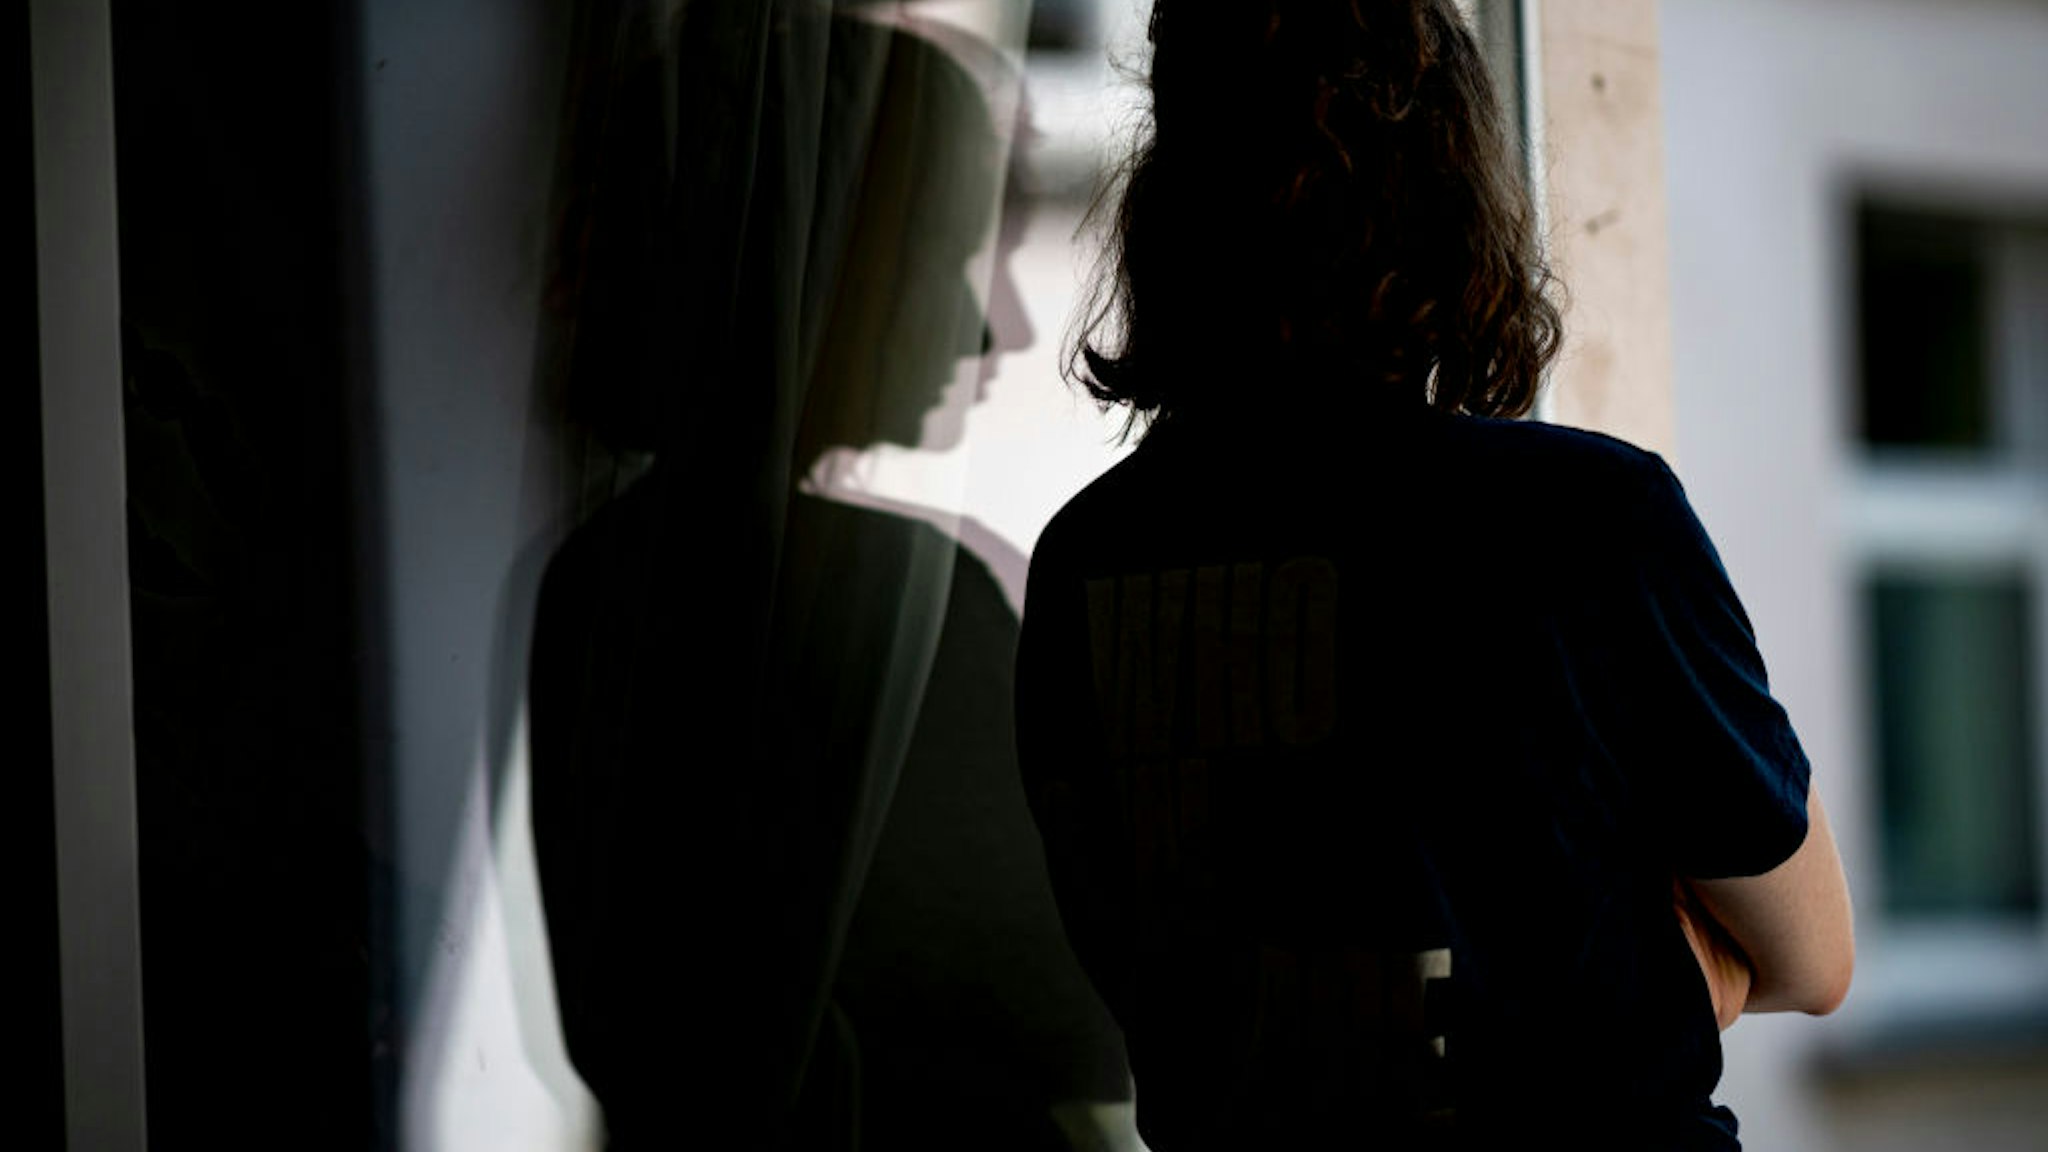 PRODUCTION - 13 July 2021, Berlin: ILLUSTRATION - A woman stands at a window in her apartment with her arms crossed. (posed scene) Photo: Fabian Sommer/dpa (Photo by Fabian Sommer/picture alliance via Getty Images)